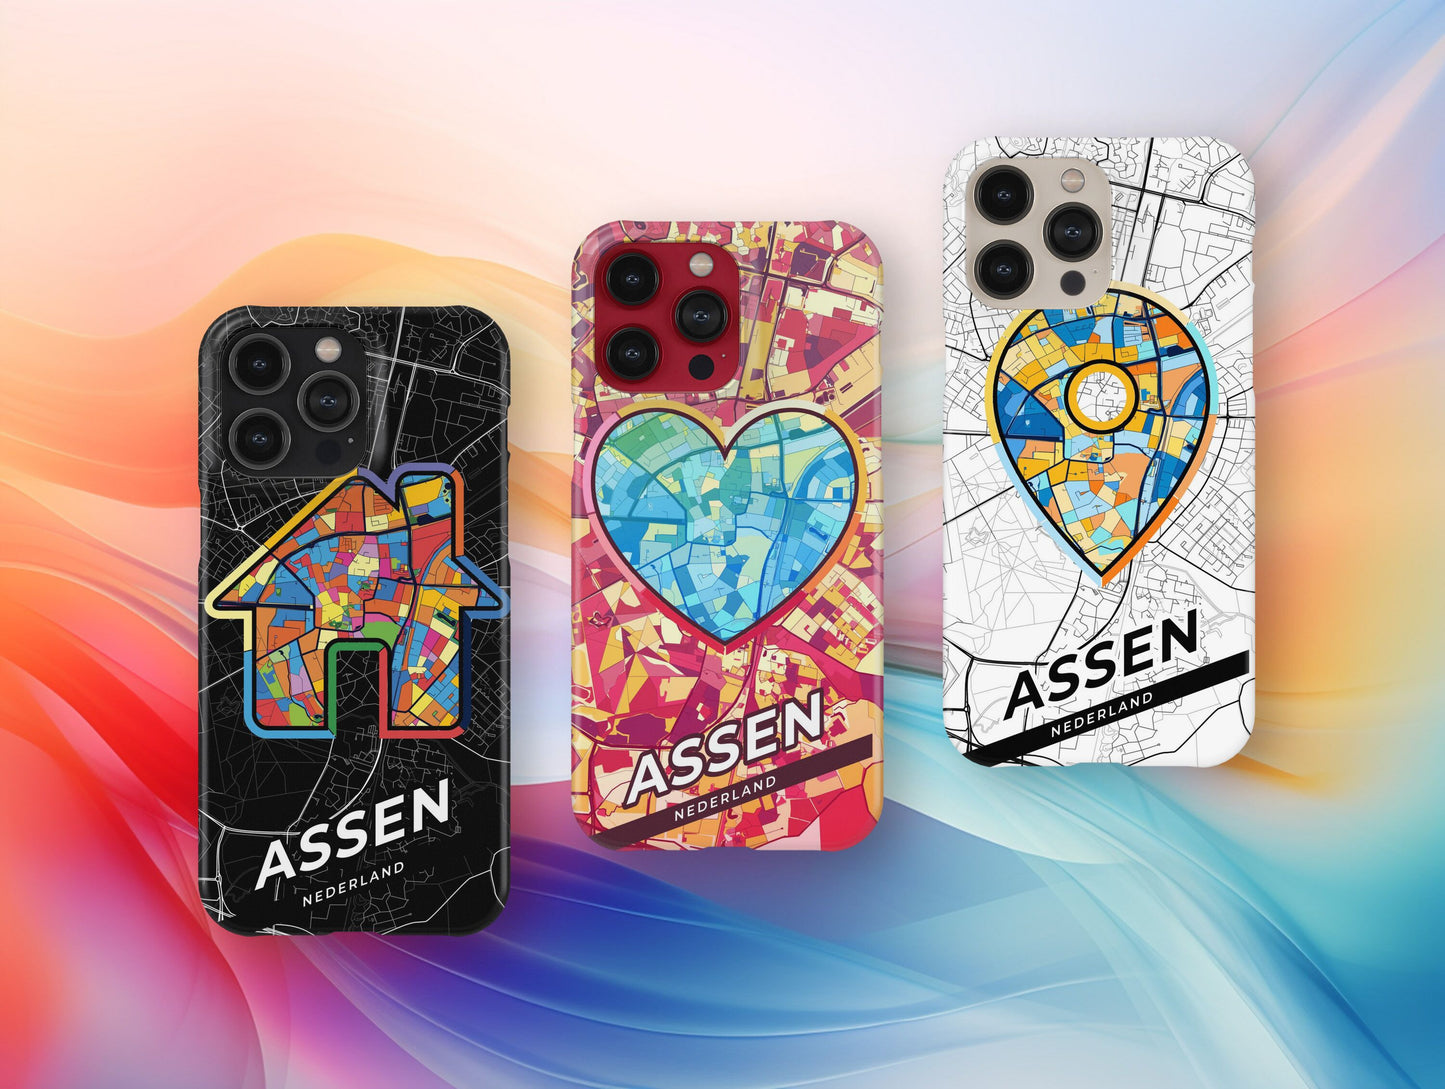 Assen Netherlands slim phone case with colorful icon. Birthday, wedding or housewarming gift. Couple match cases.